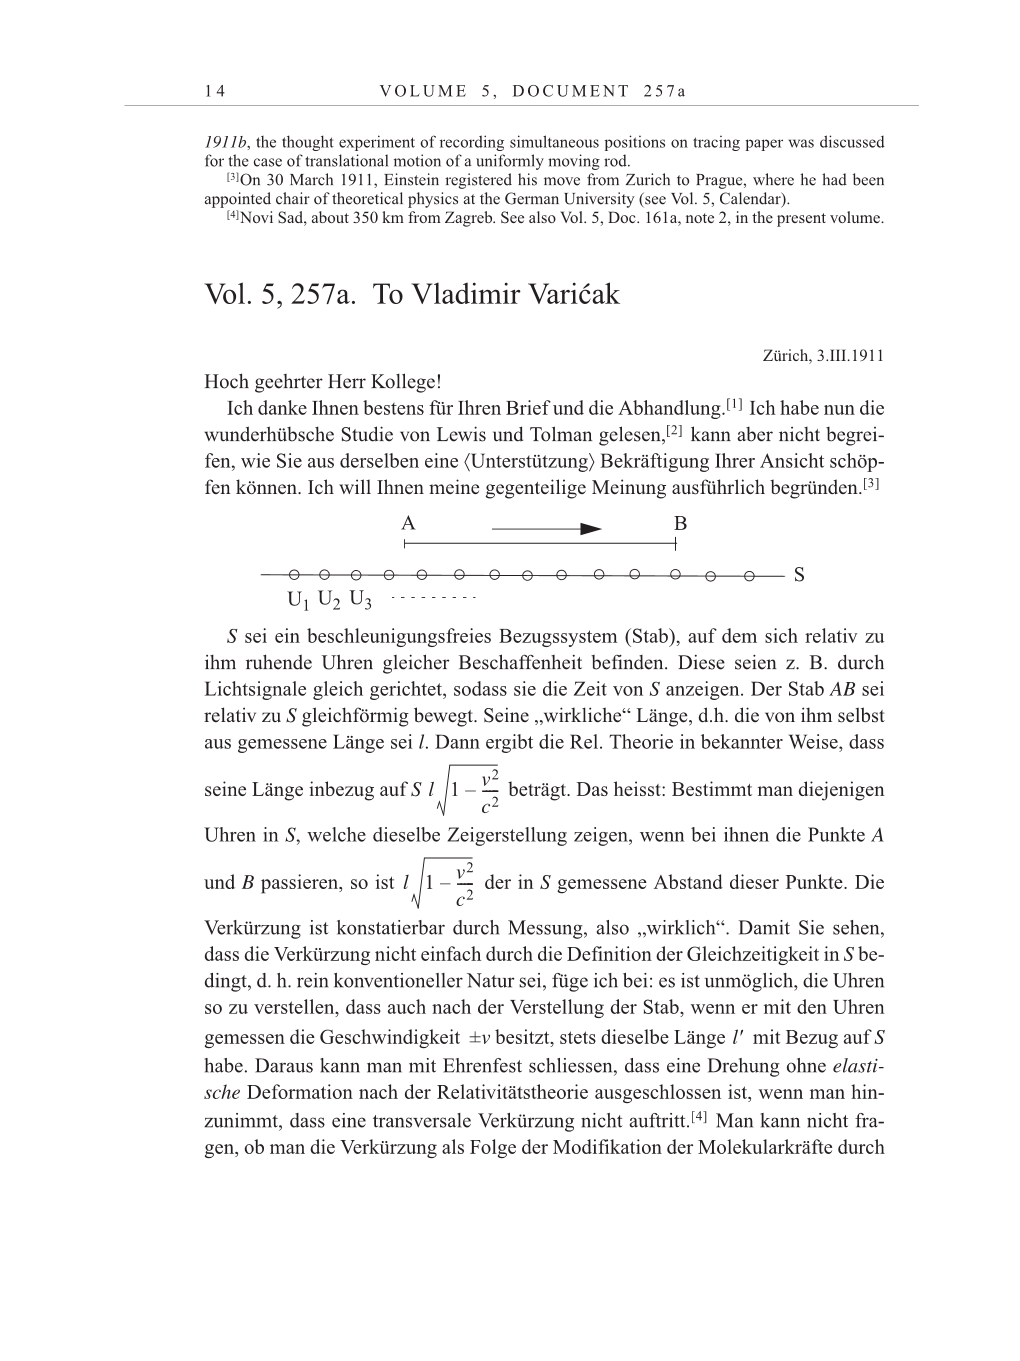 Volume 10: The Berlin Years: Correspondence May-December 1920 / Supplementary Correspondence 1909-1920 page 14